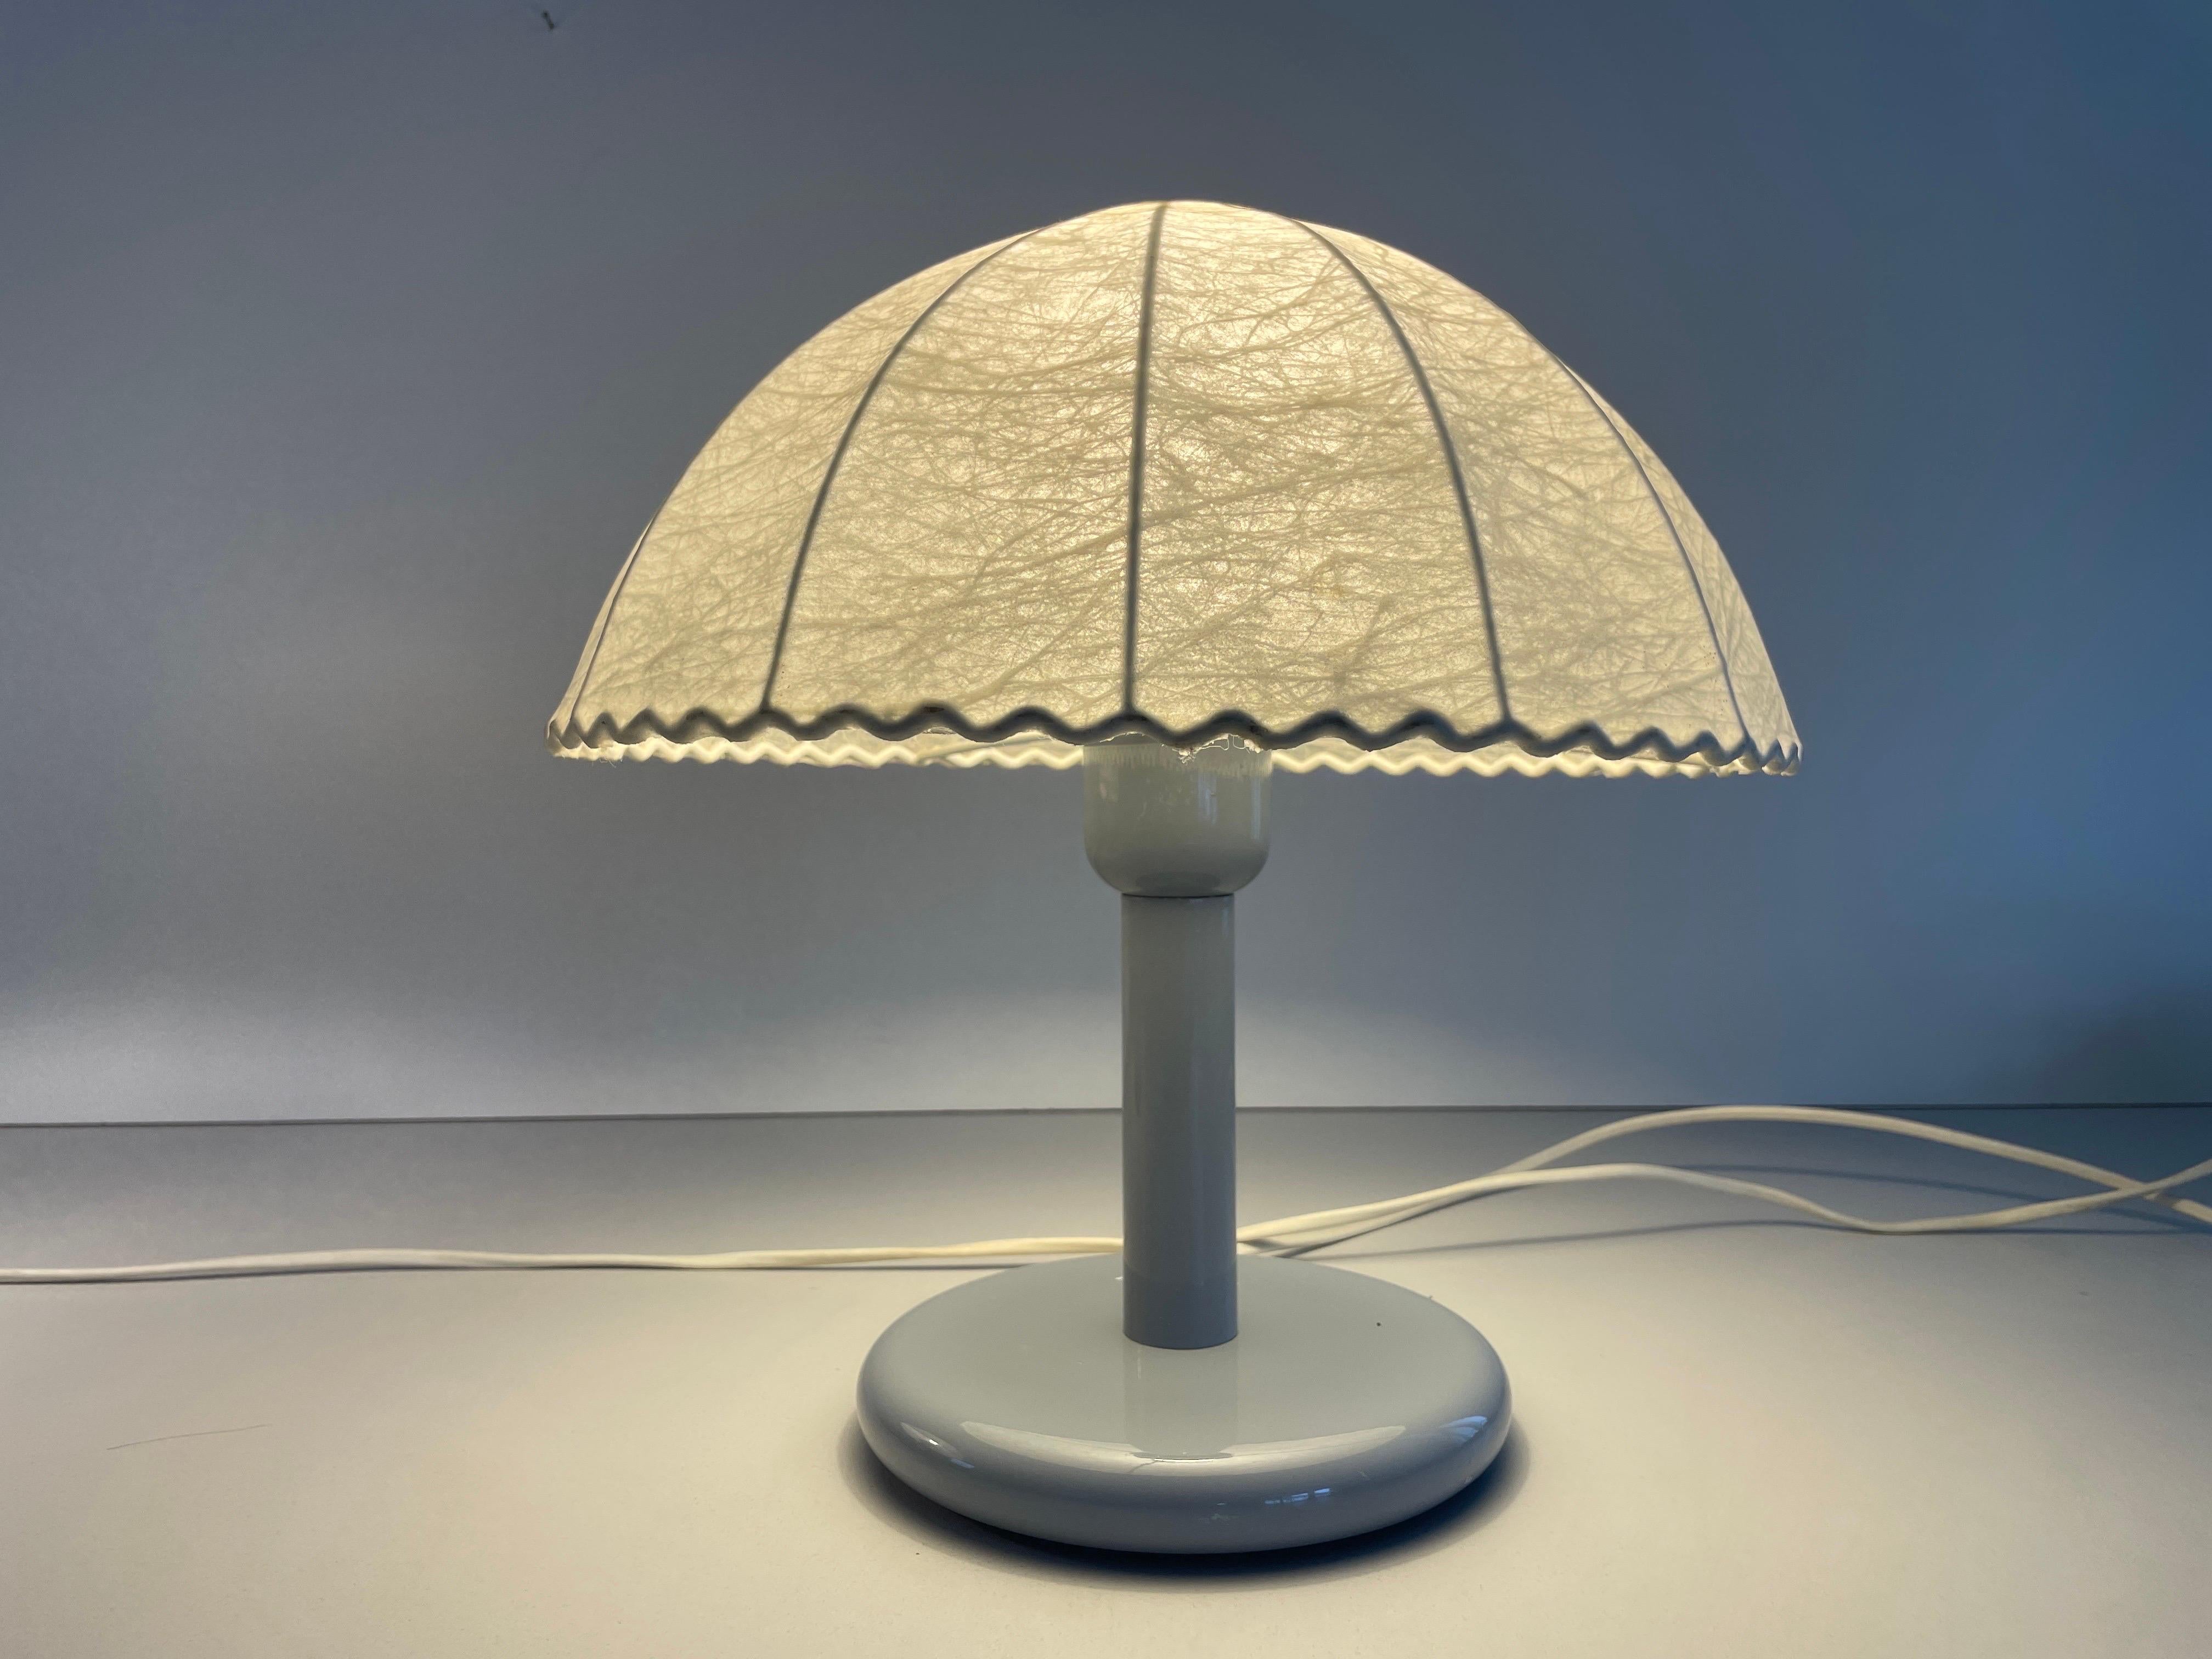 Pair of Cocoon Table Lamps with Grey Metal Base by GOLDKANT, 1960s, Germany For Sale 9